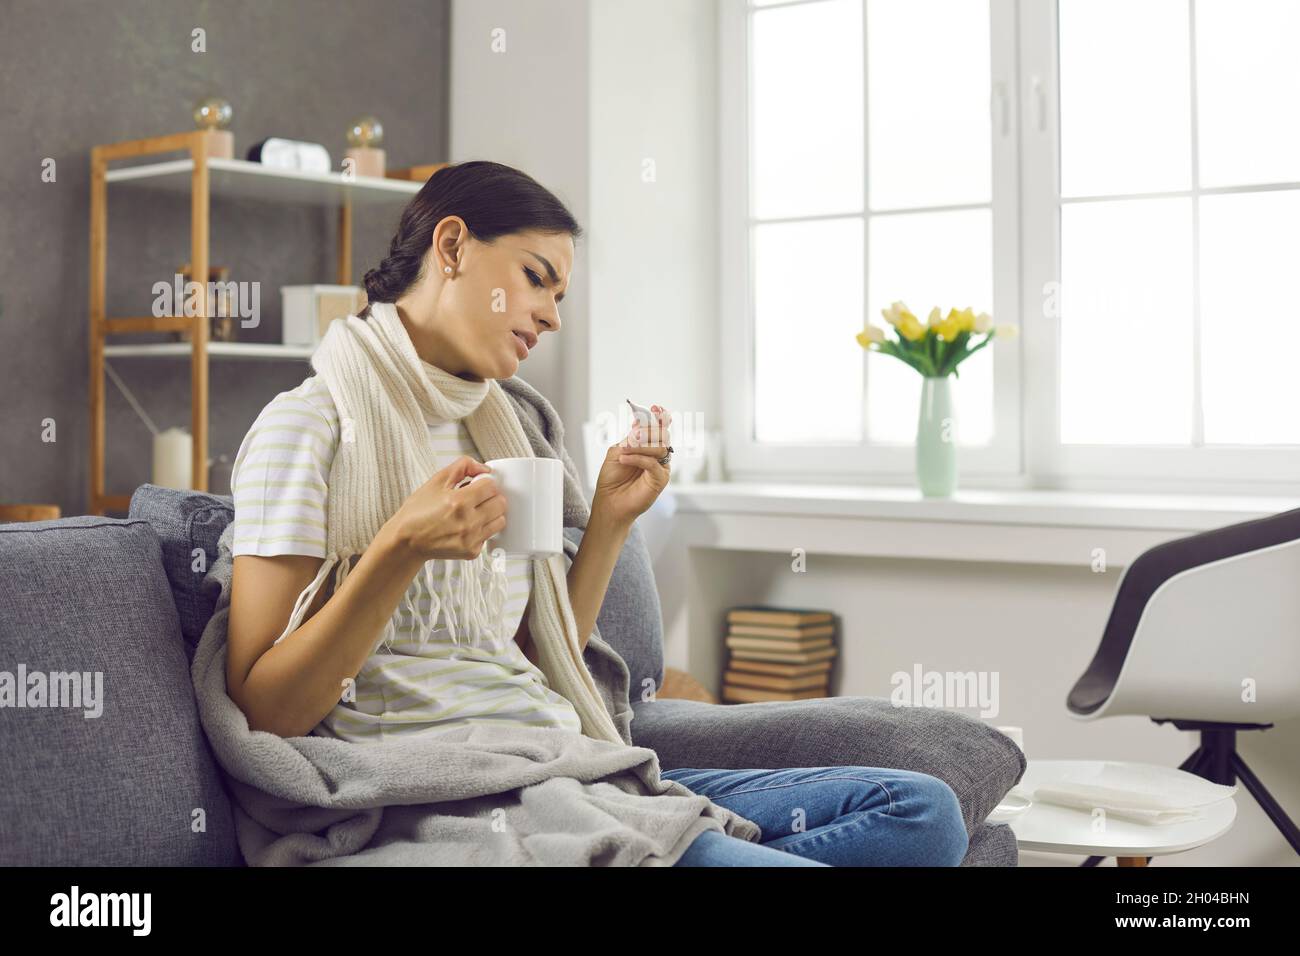 Young woman who has the flu checks her temperature while sitting on a sofa at home. Stock Photo